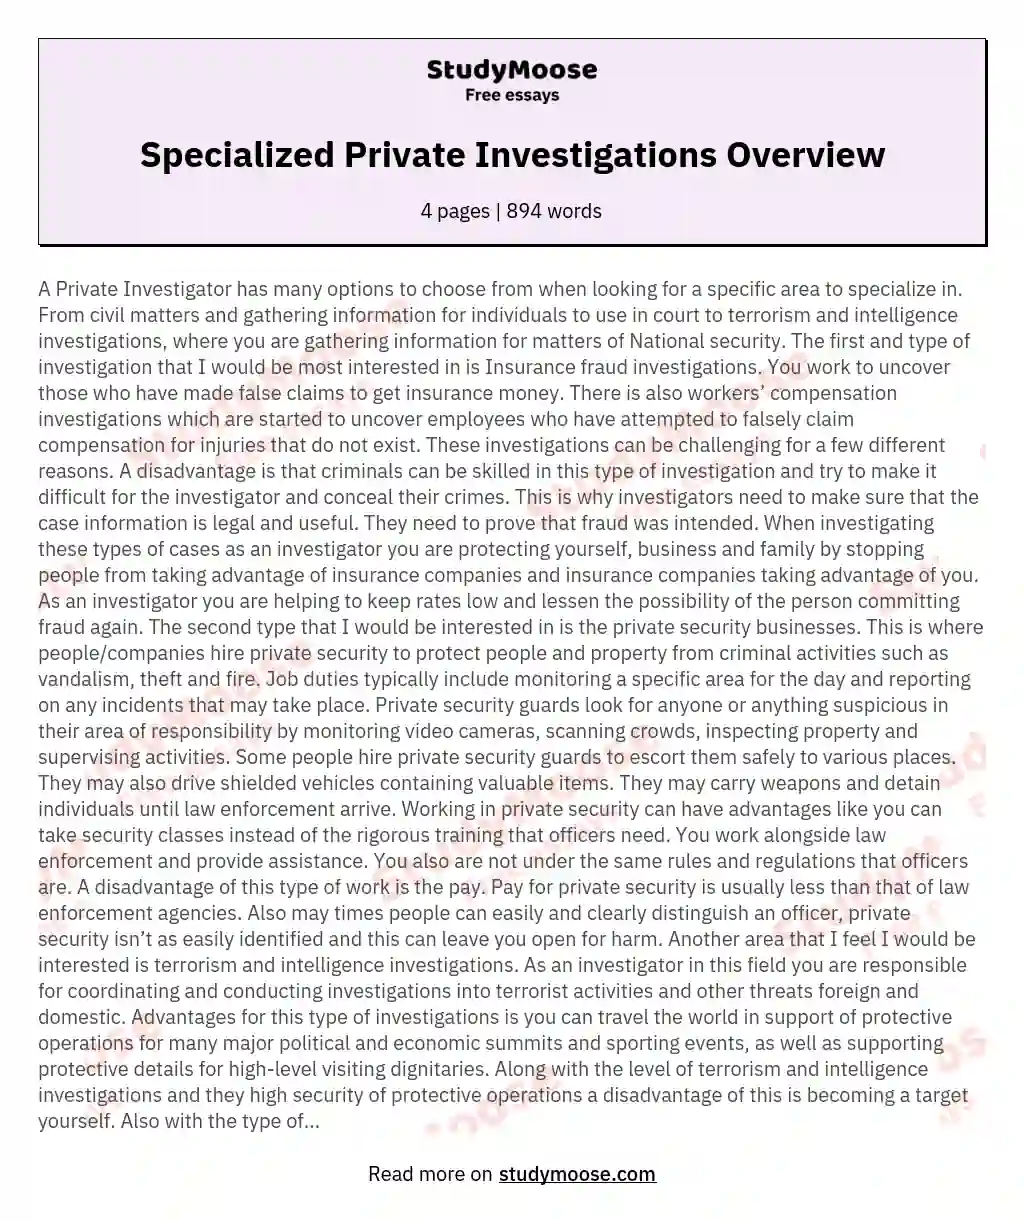 Specialized Private Investigations Overview essay